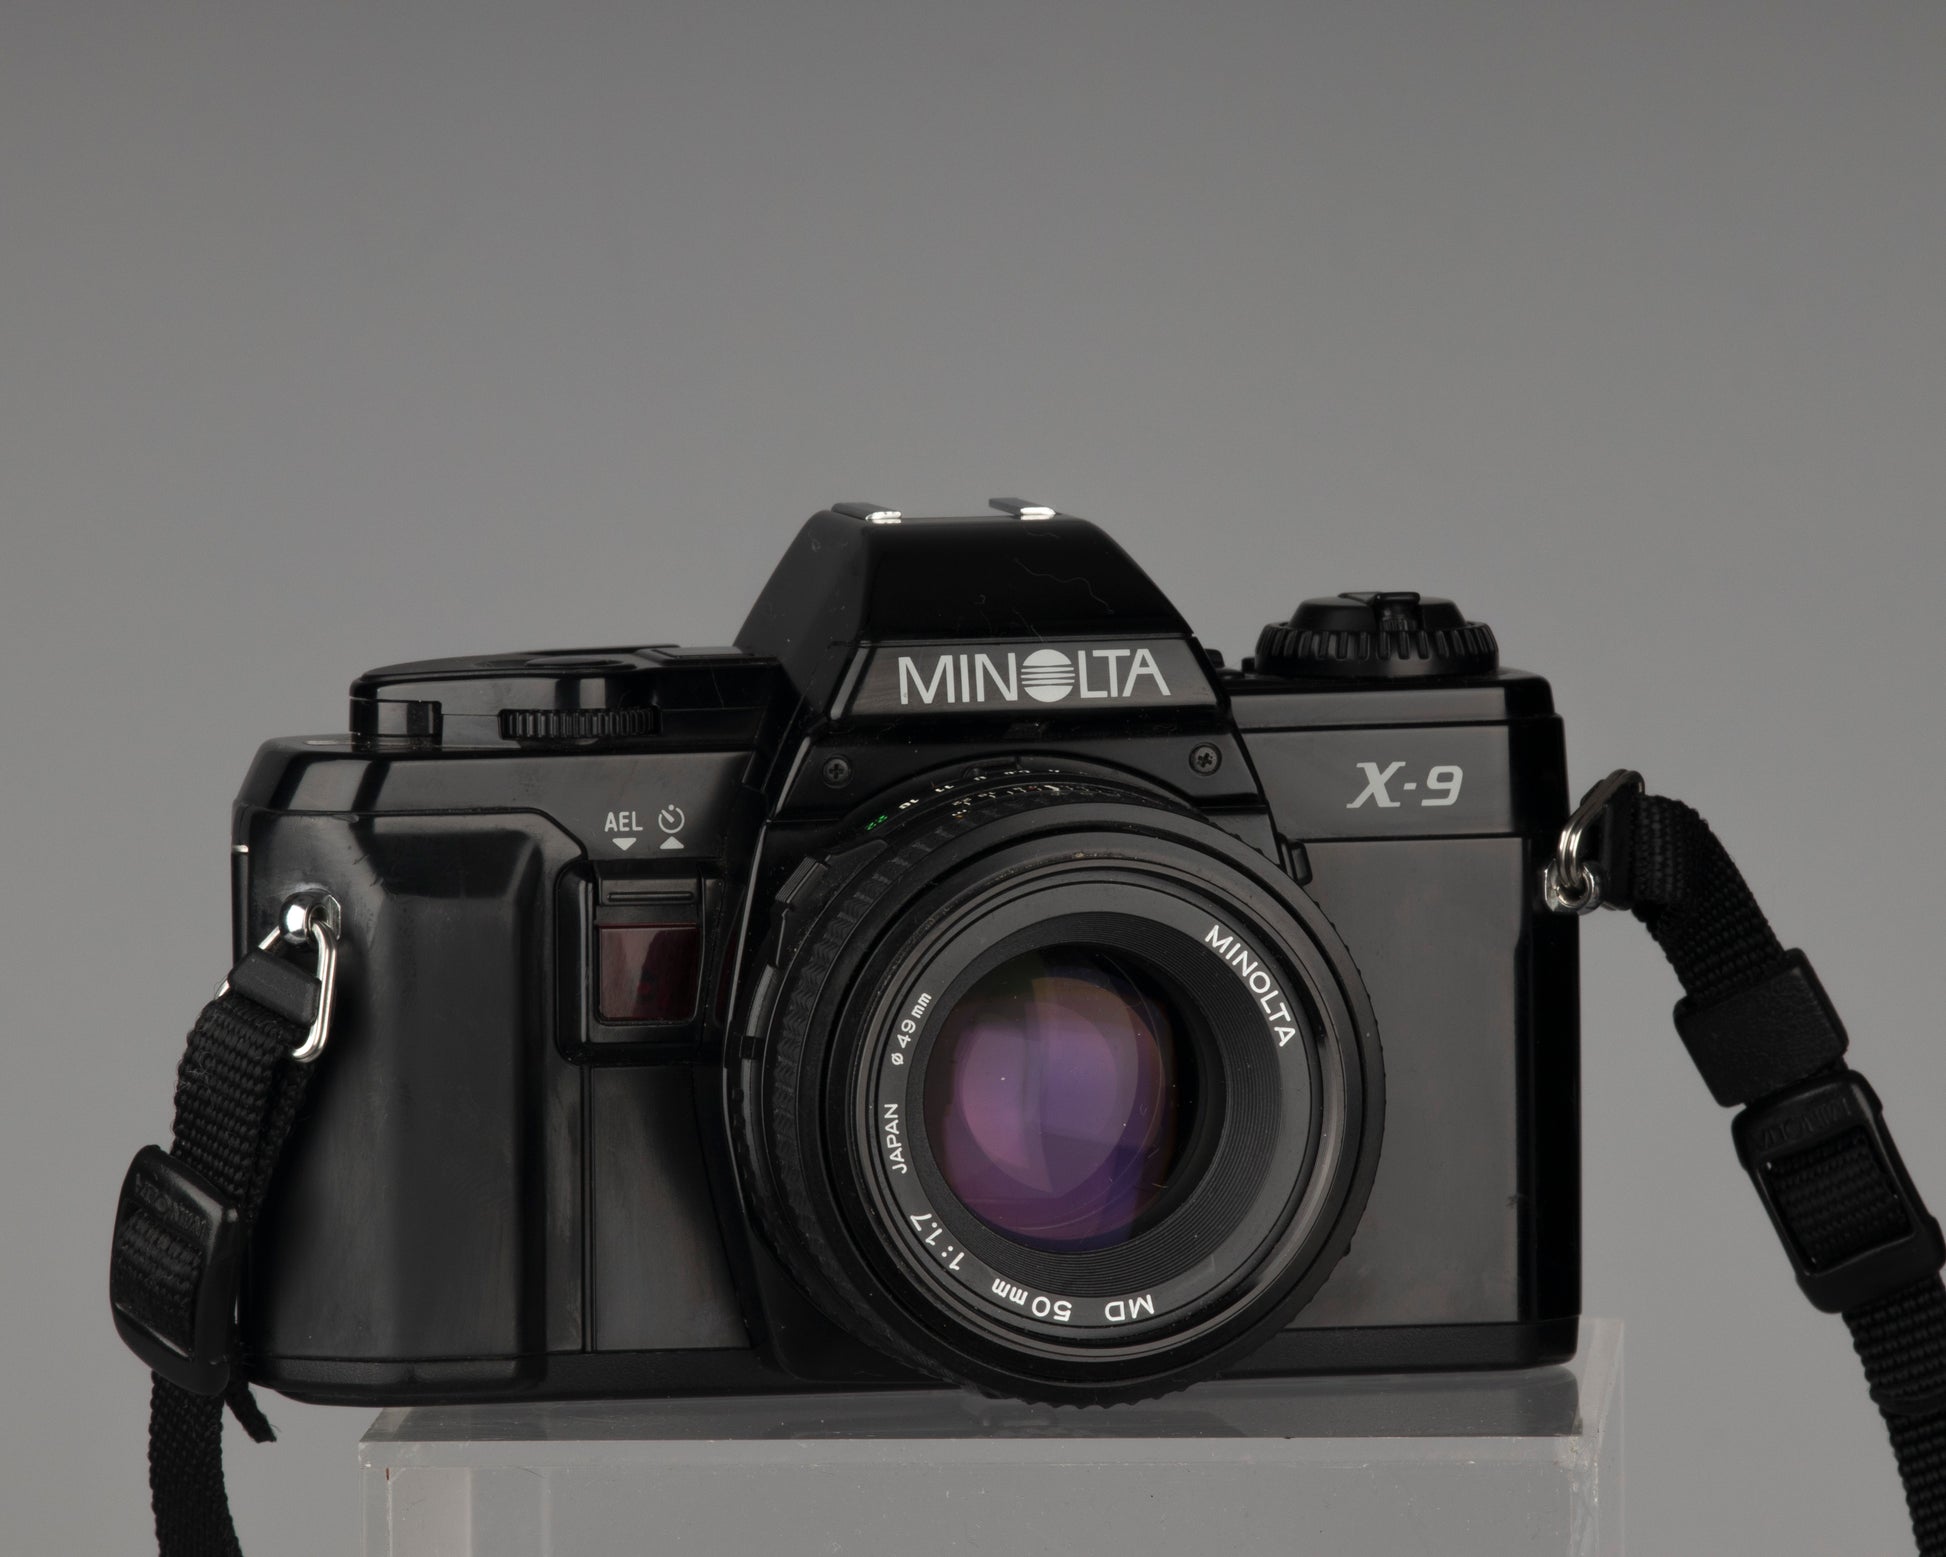 Minolta X-9 SLR camera with MD 50mm f1.7 lens. The circa 1990 X-9 was the company's final manual focus SLR design, a very worthy example in a line that began with the Minolta SR (1958).